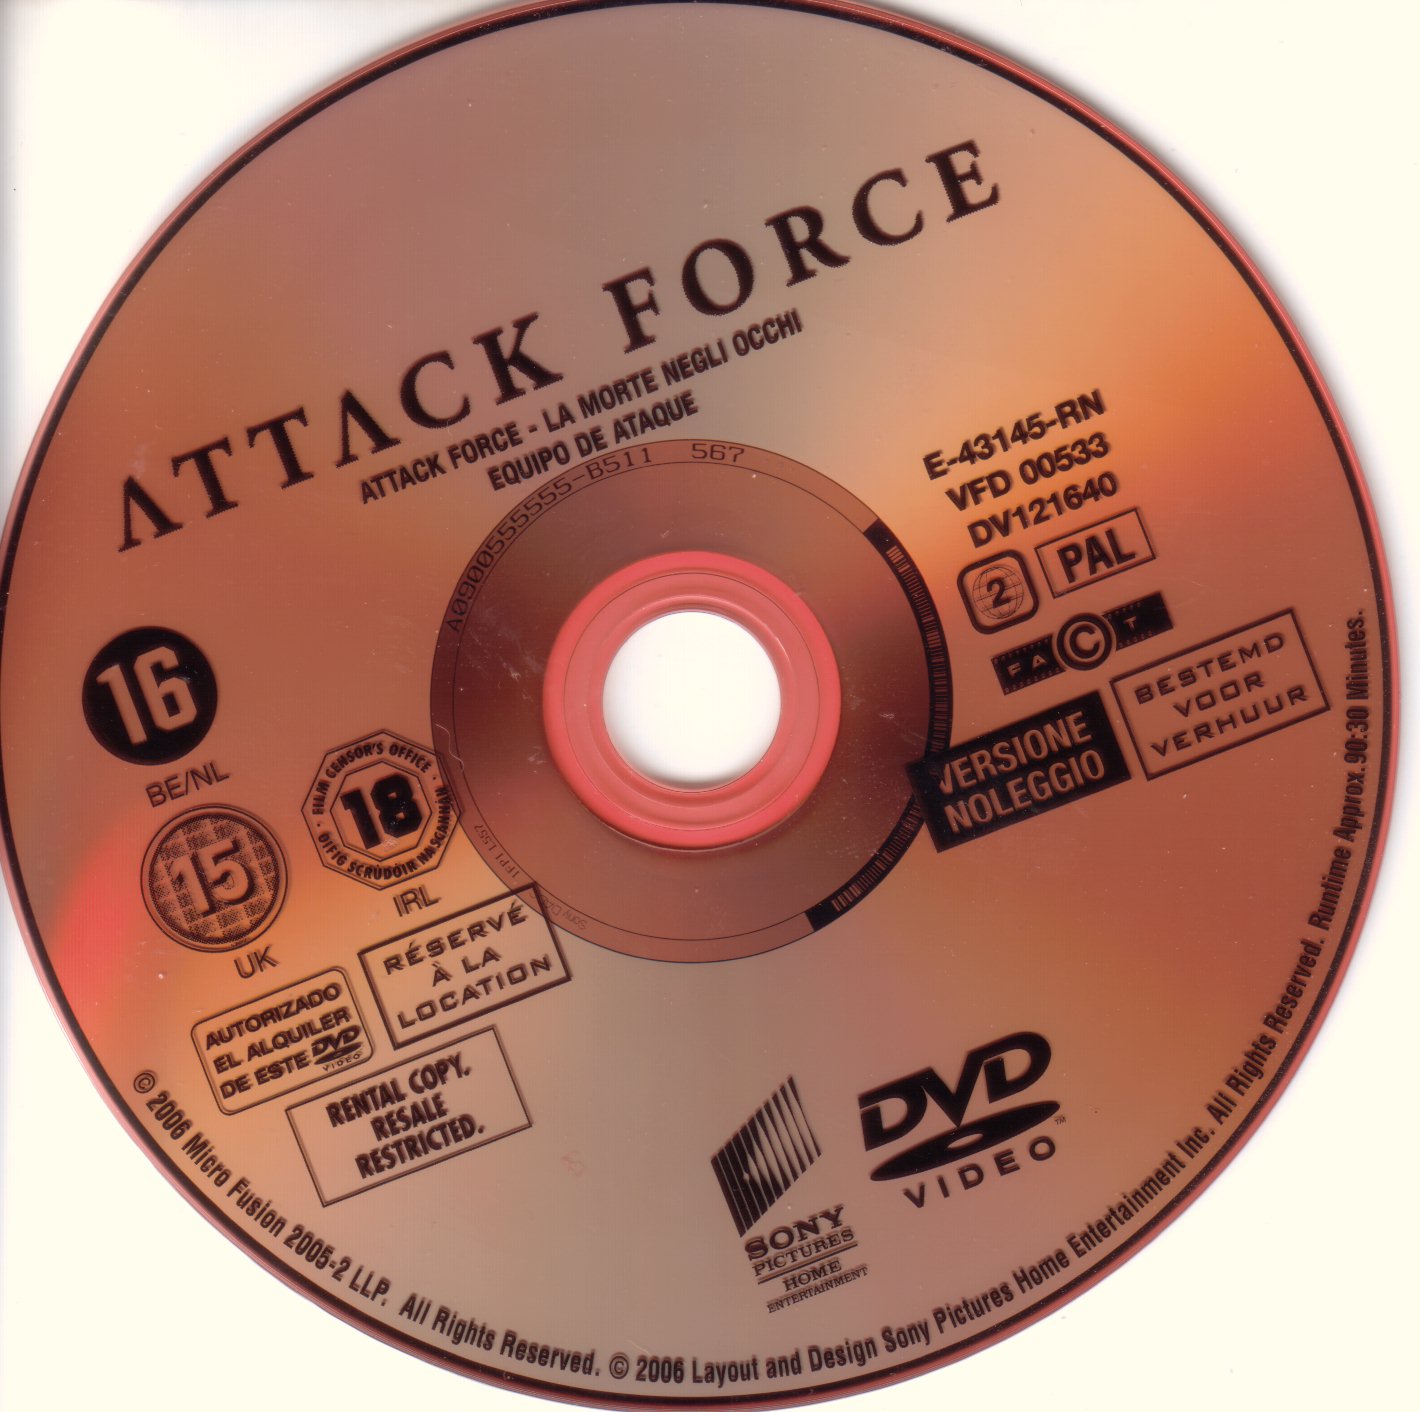 Attack force